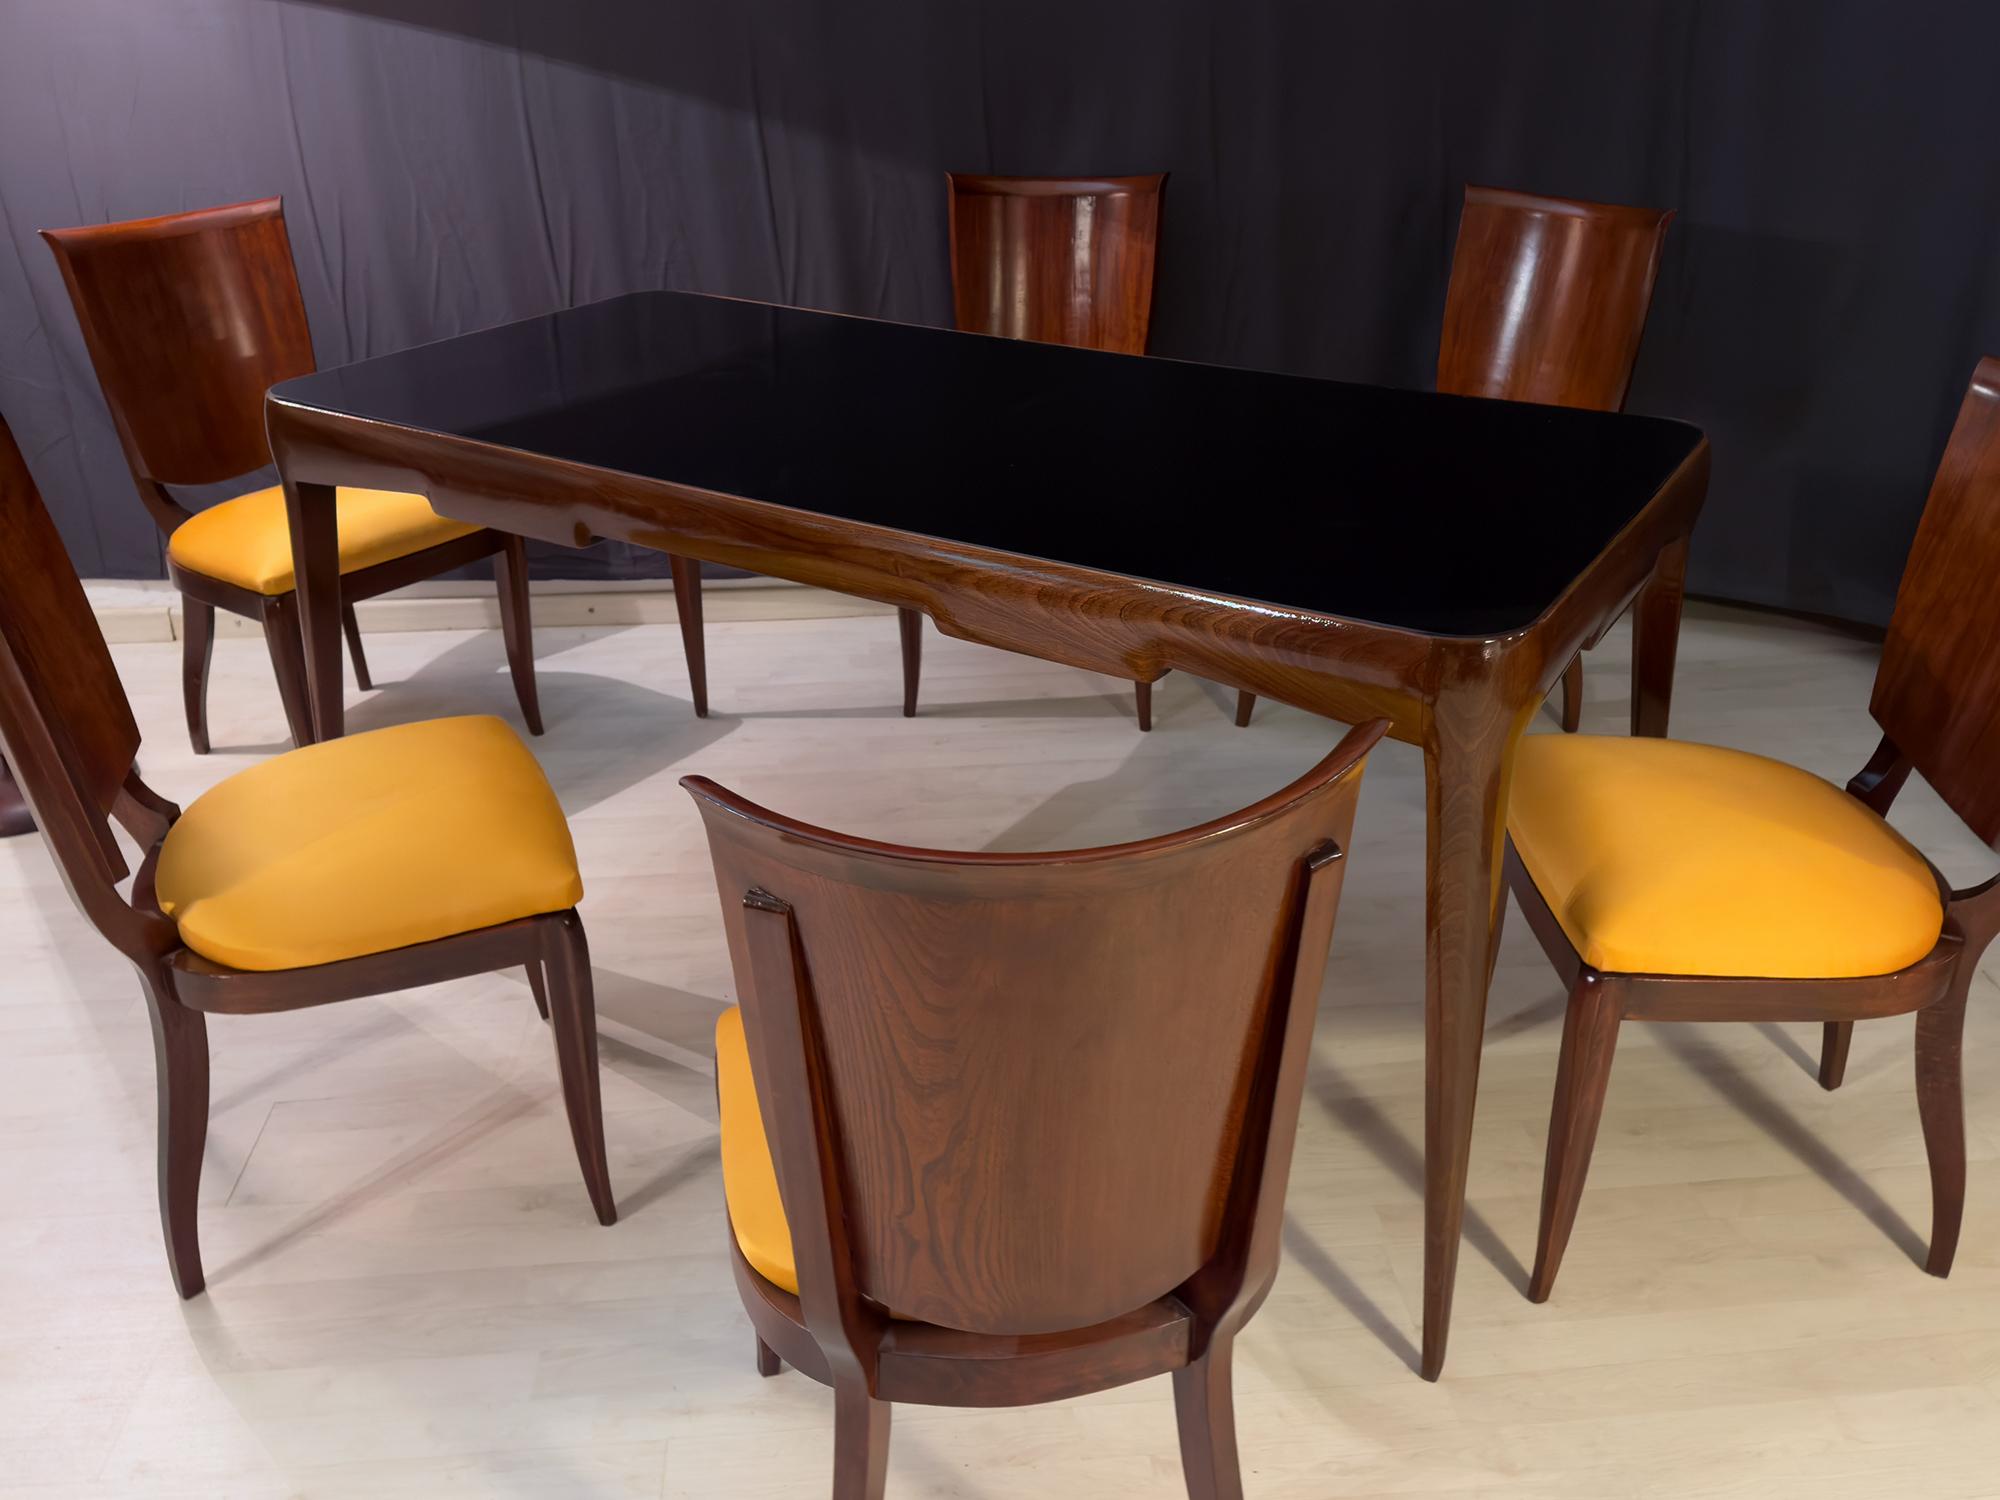 Italian Mid-Century Dining Table Gio Ponti style, 1950s For Sale 14